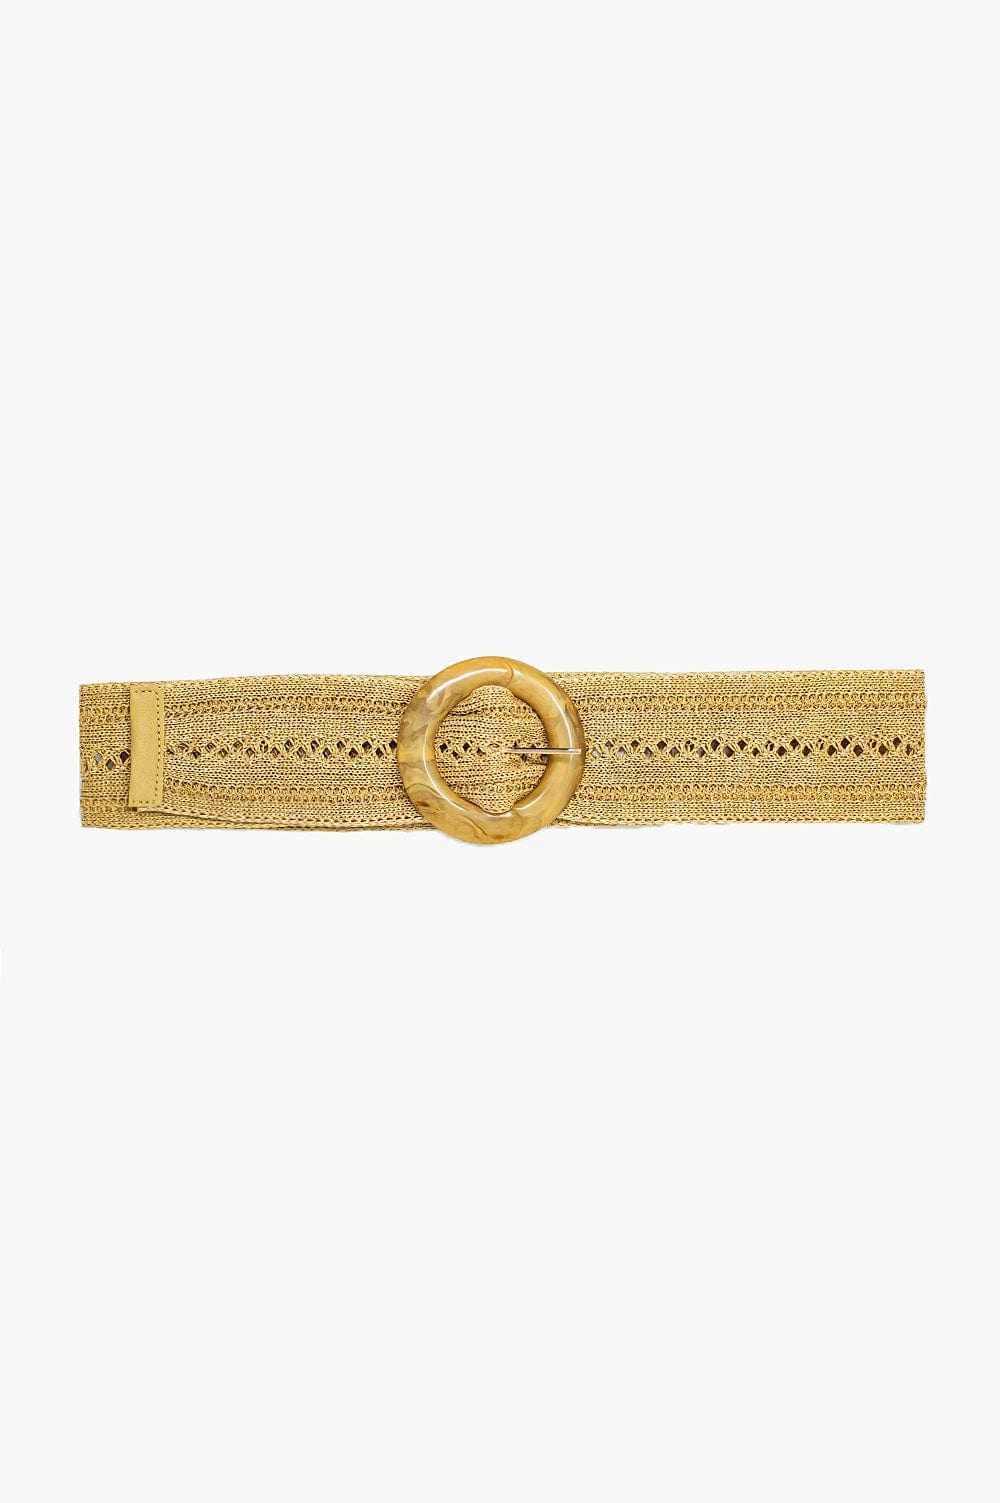 Q2 Women's Belt One Size / Beige Creme Woven Belt With Round Buckle With Marble Effect